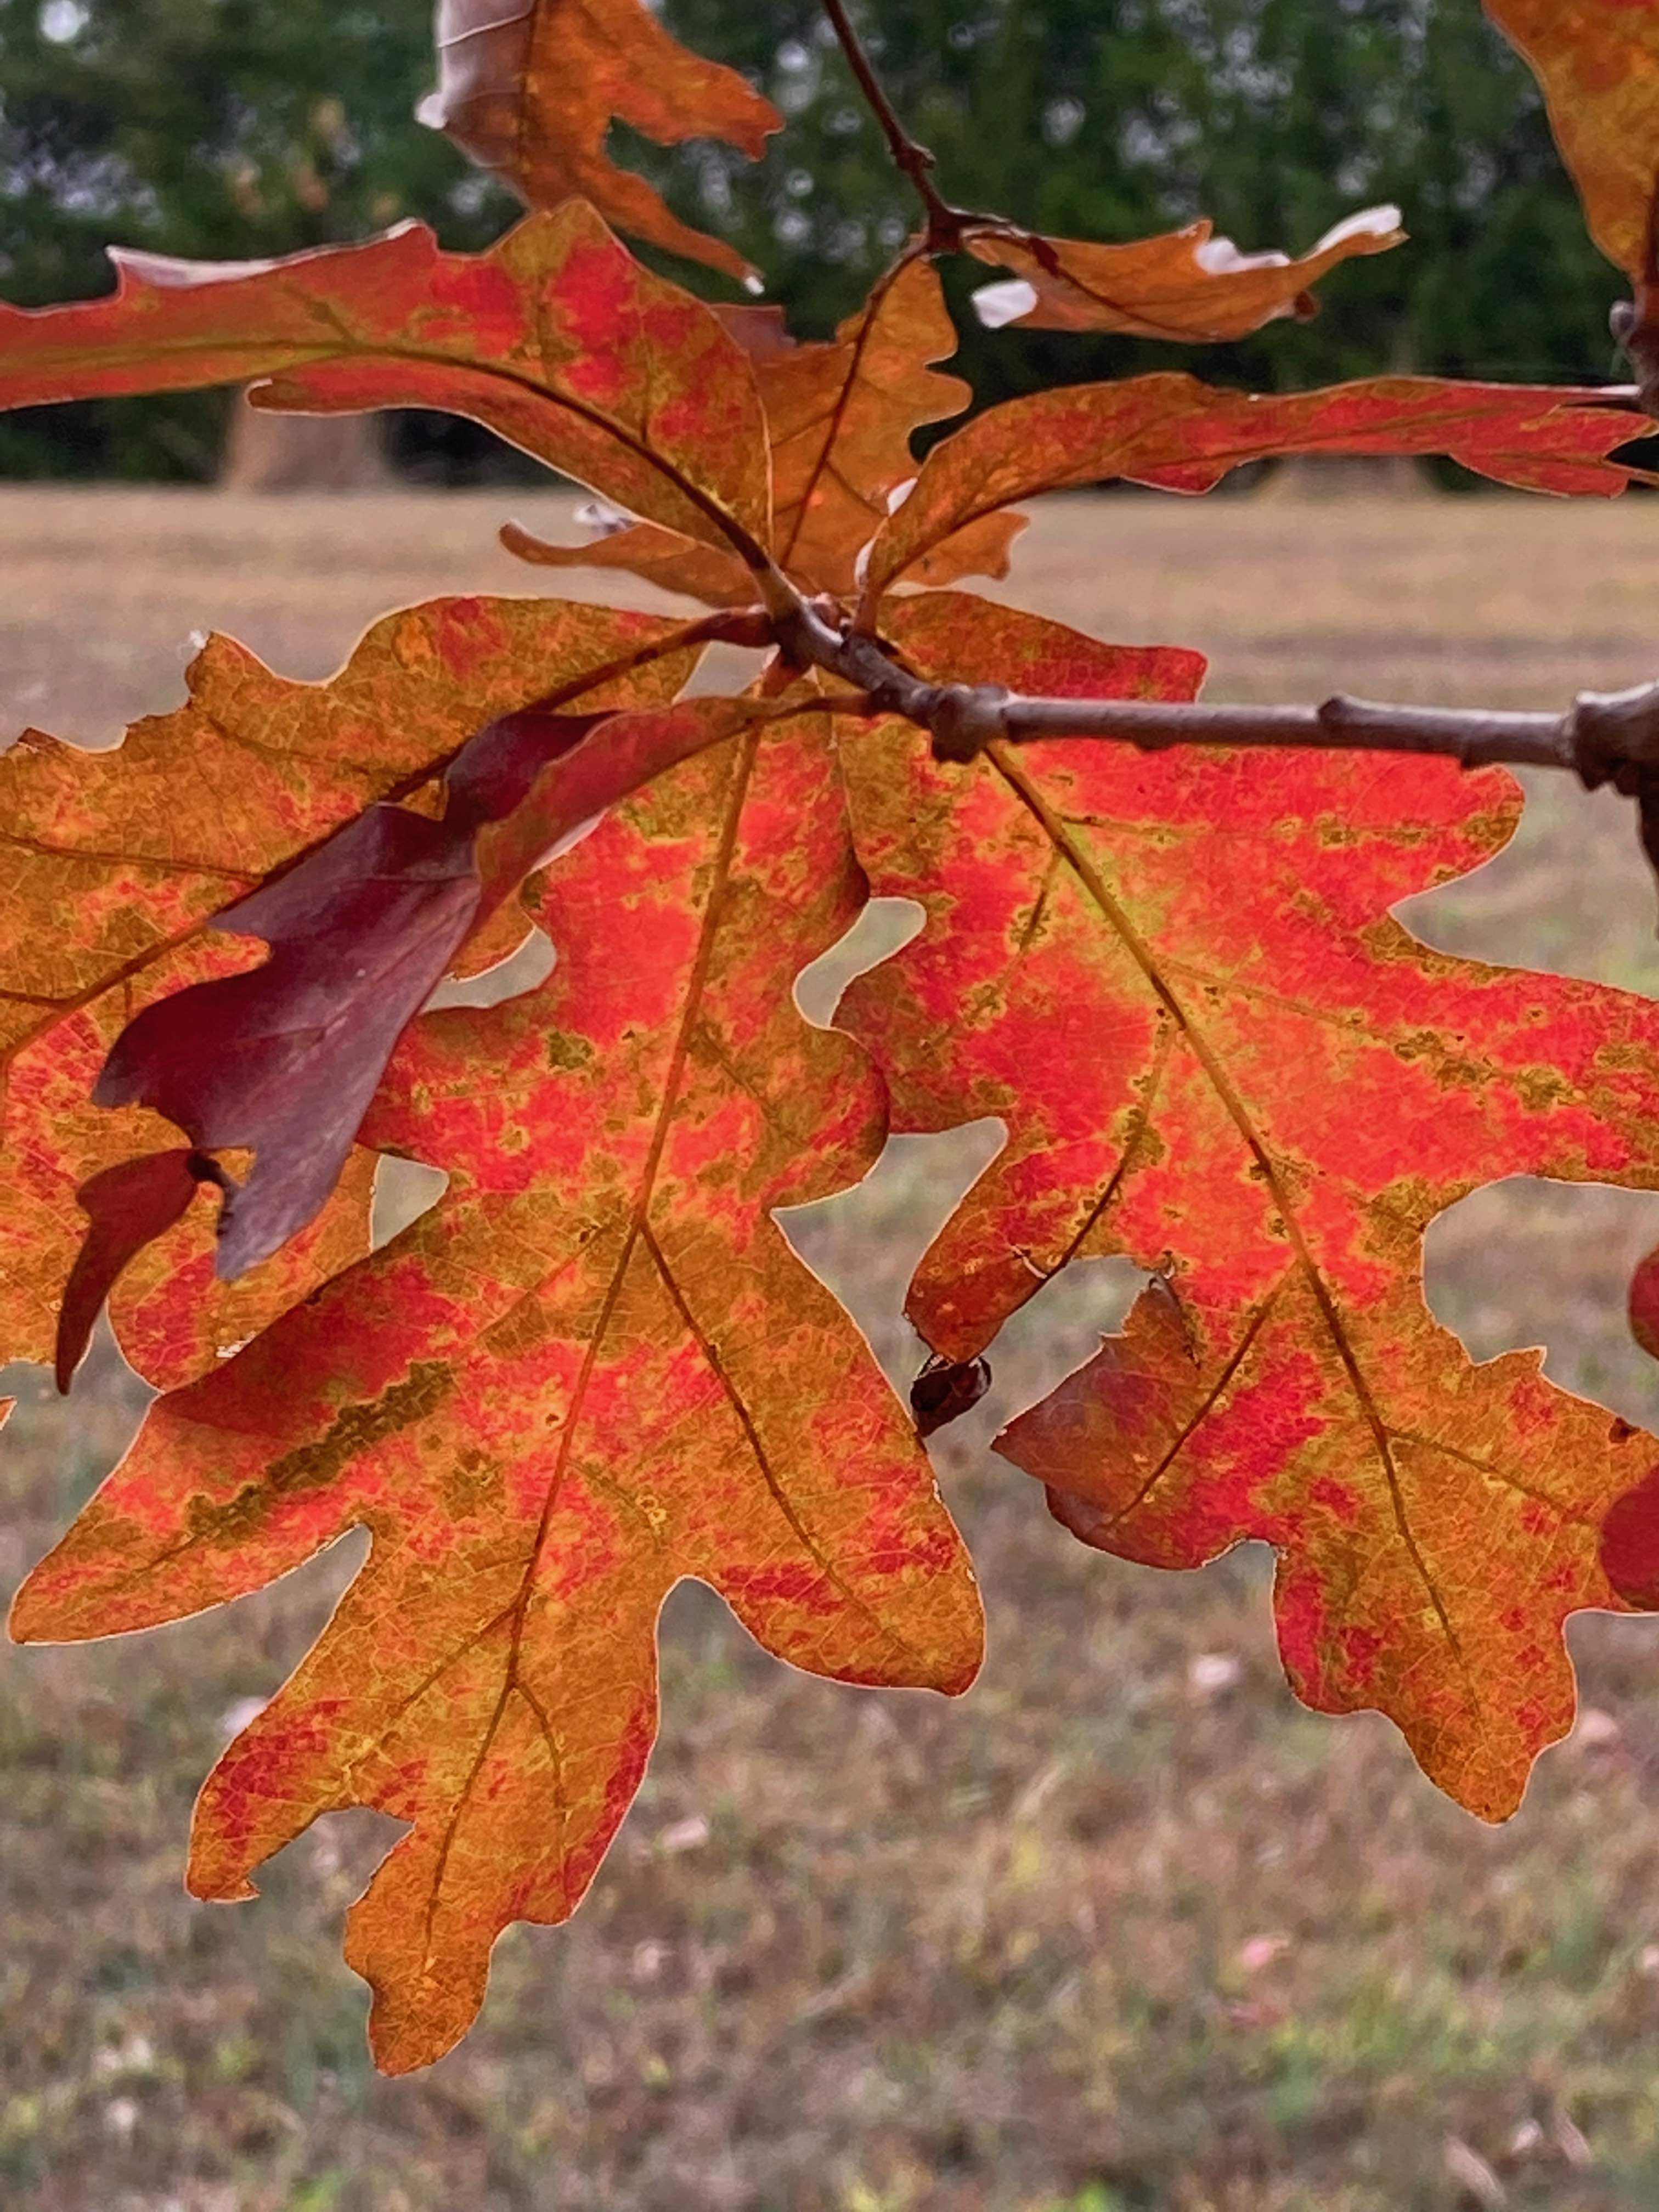 The Scientific Name is Quercus alba. You will likely hear them called White Oak. This picture shows the  of Quercus alba